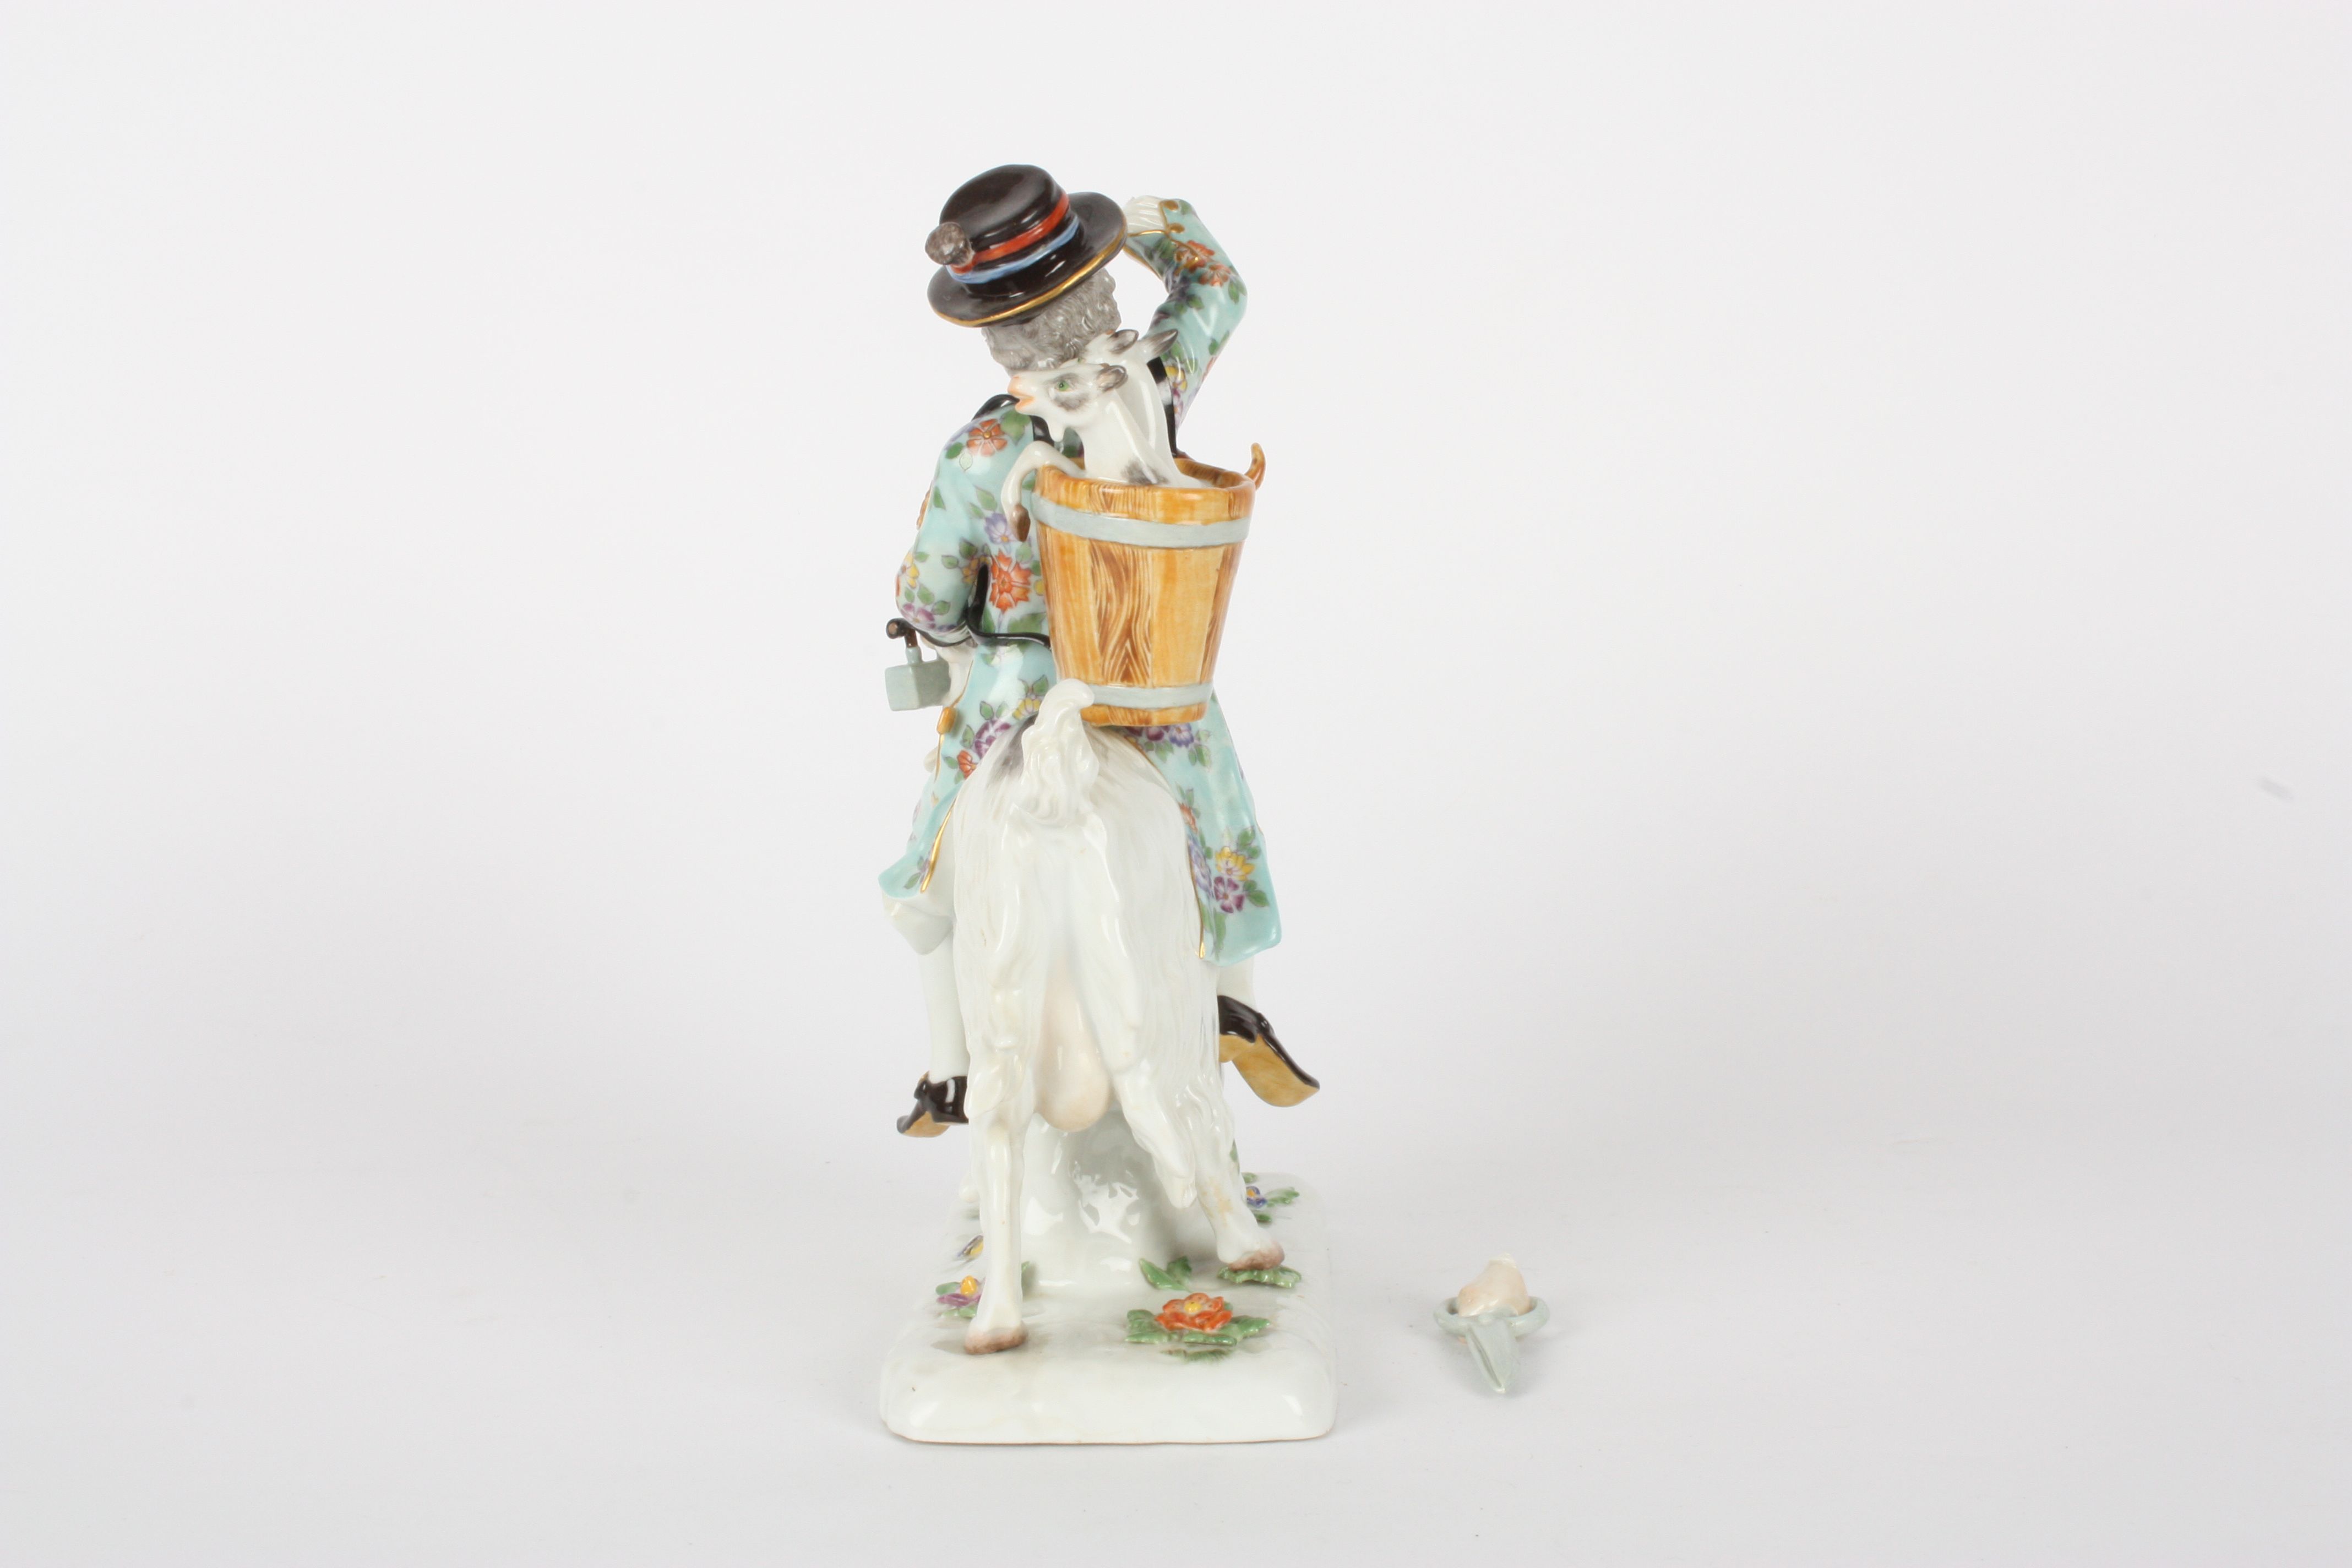 Late 20th century Meissen figure, Tailor on a Goat, after Kaendler, painted blue cross swords - Image 3 of 5